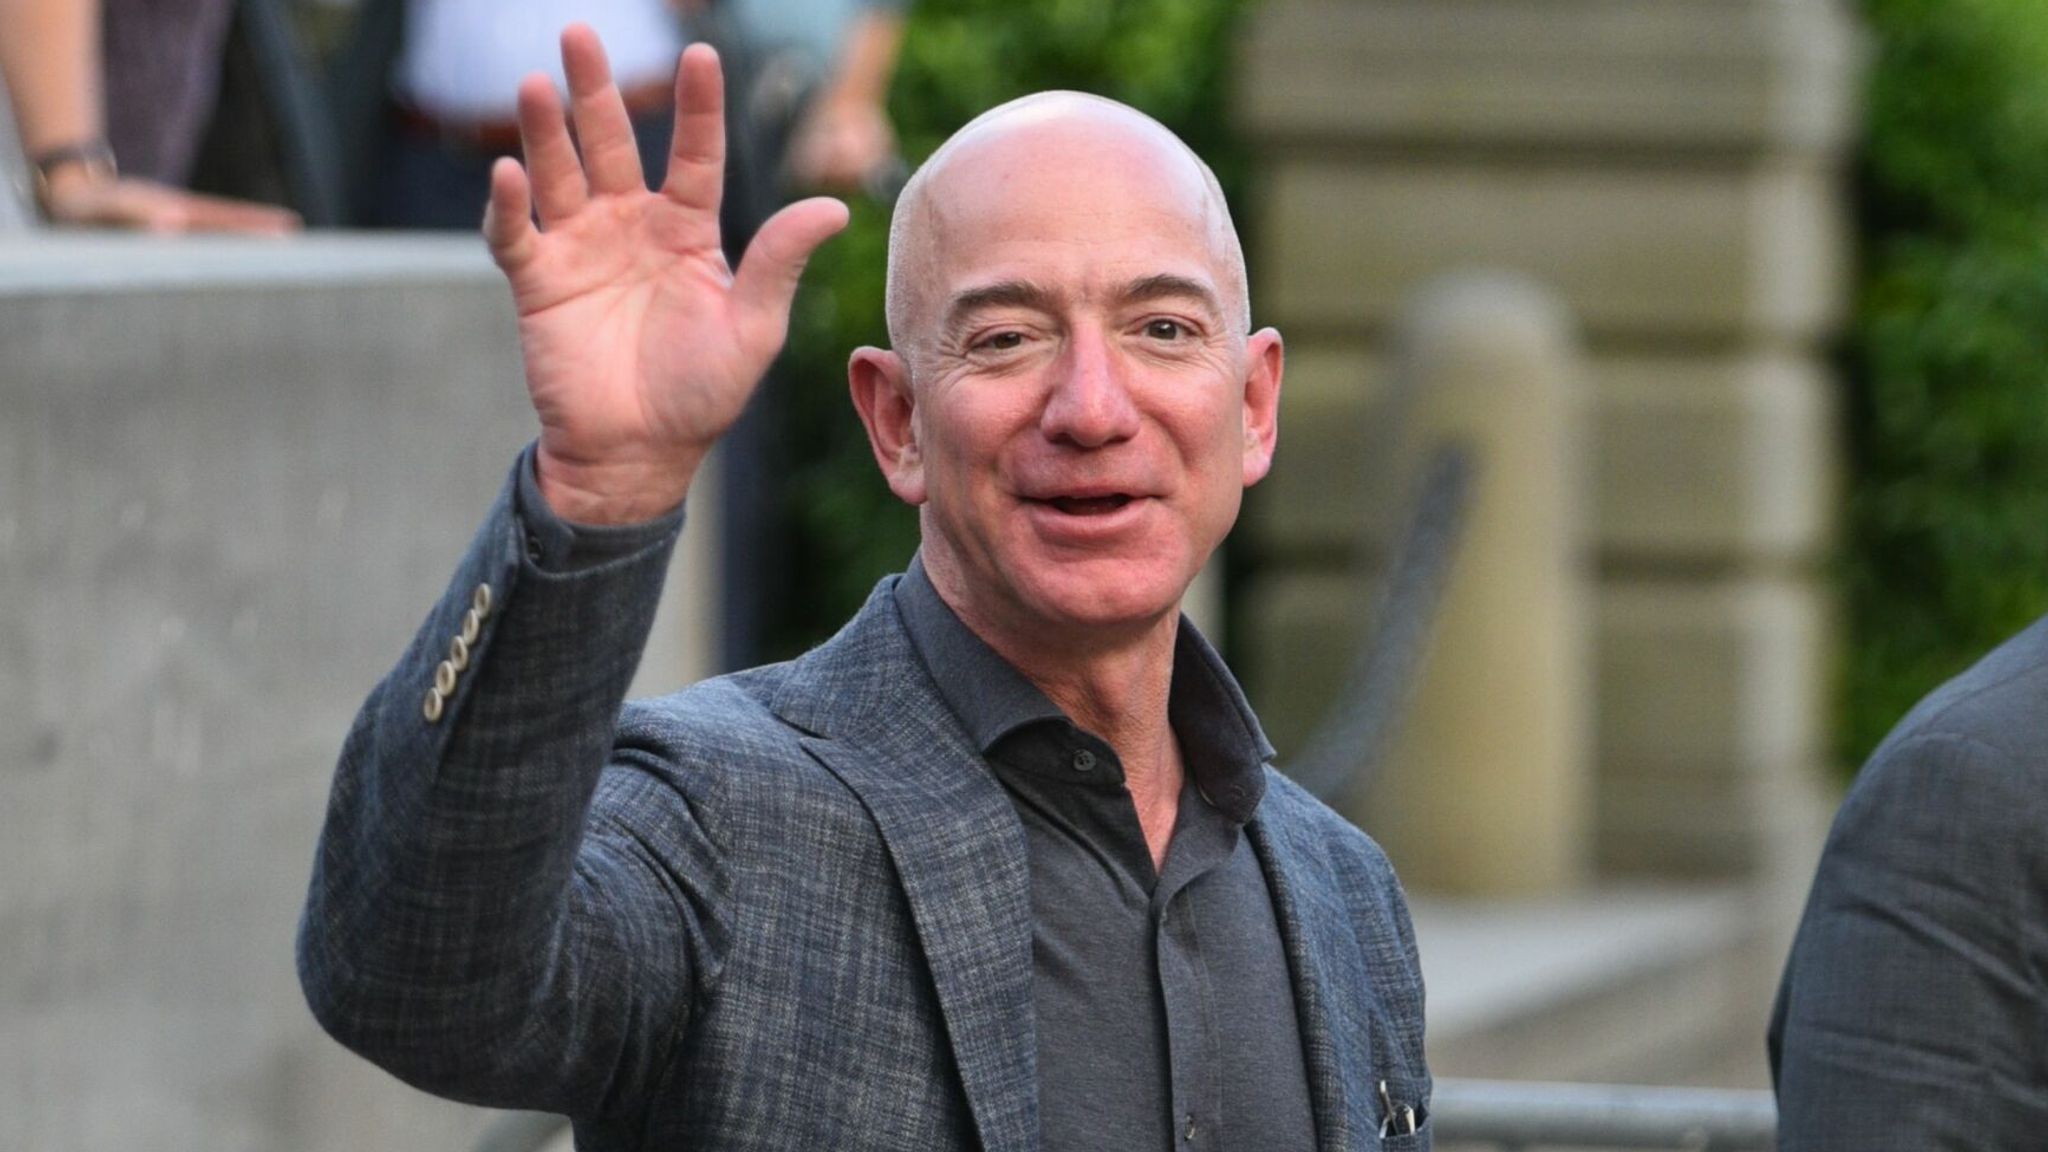 jeff-bezos-steps-down-as-amazon-ceo-today-but-how-much-power-is-he